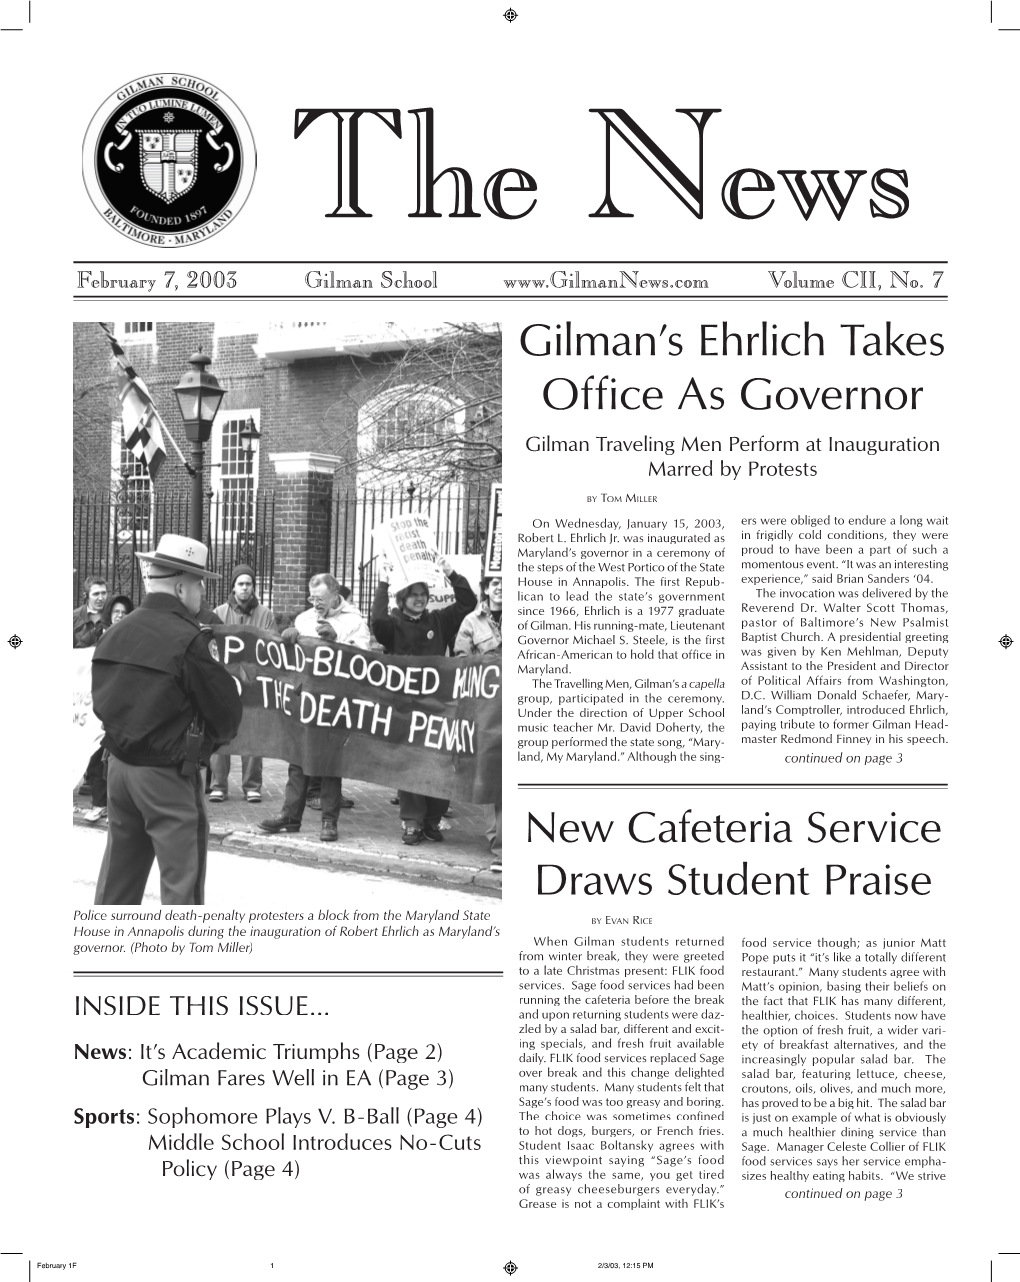 February 1F 1 2/3/03, 12:15 PM Page 2 the Gilman News • February 7, 2003 LETTERS